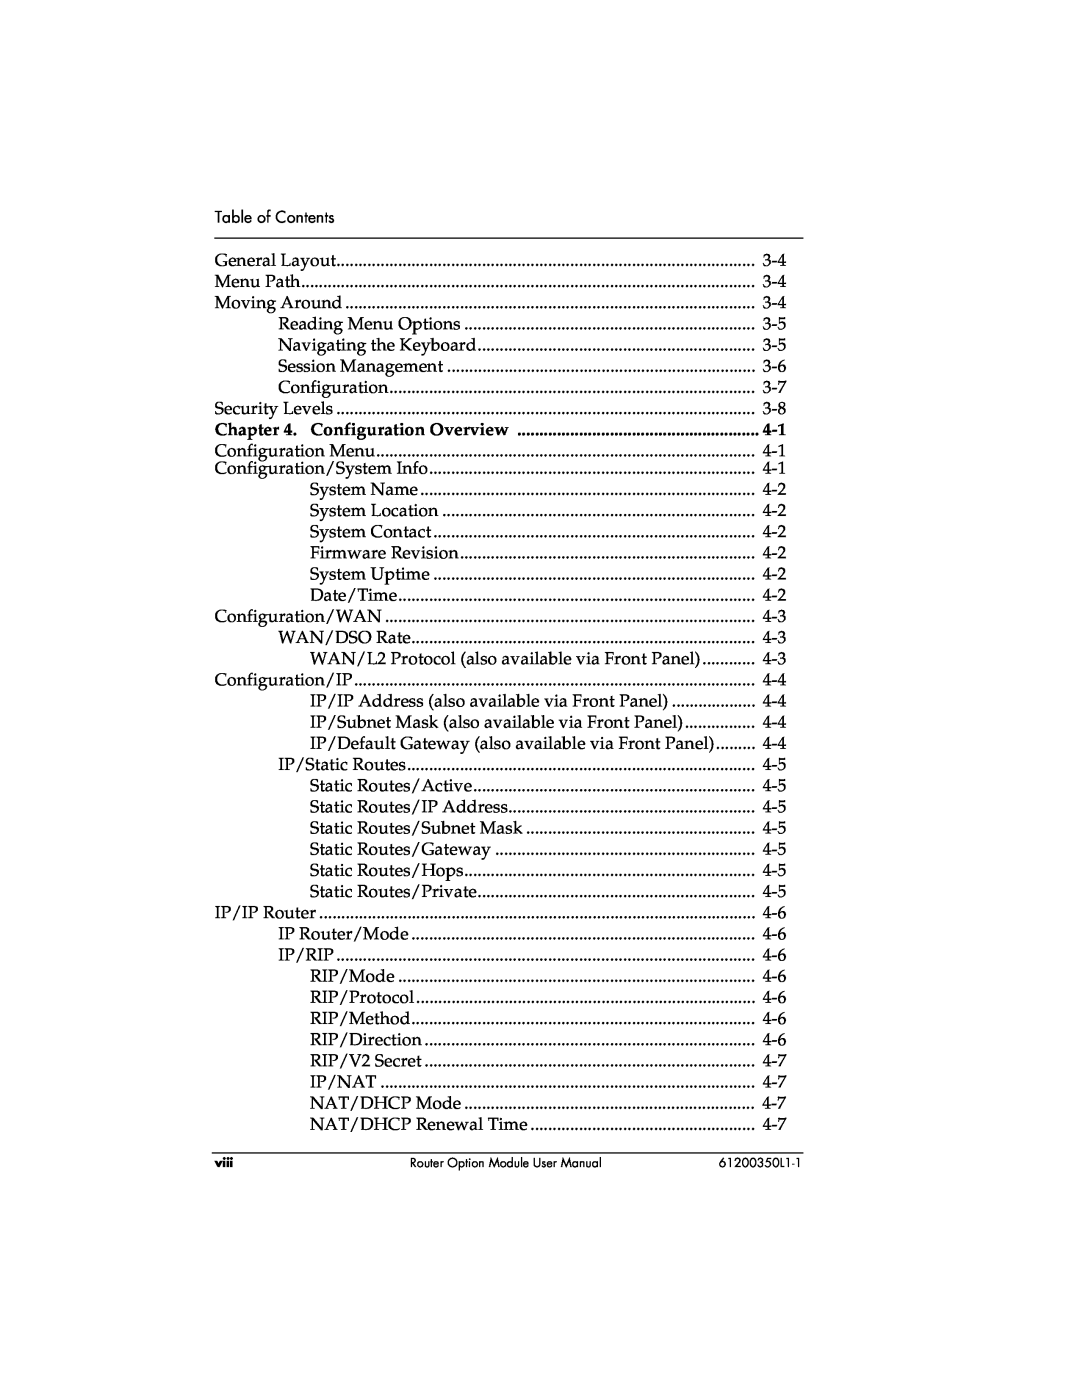 ADTRAN 1200350L1 user manual Configuration Overview, Table of Contents 